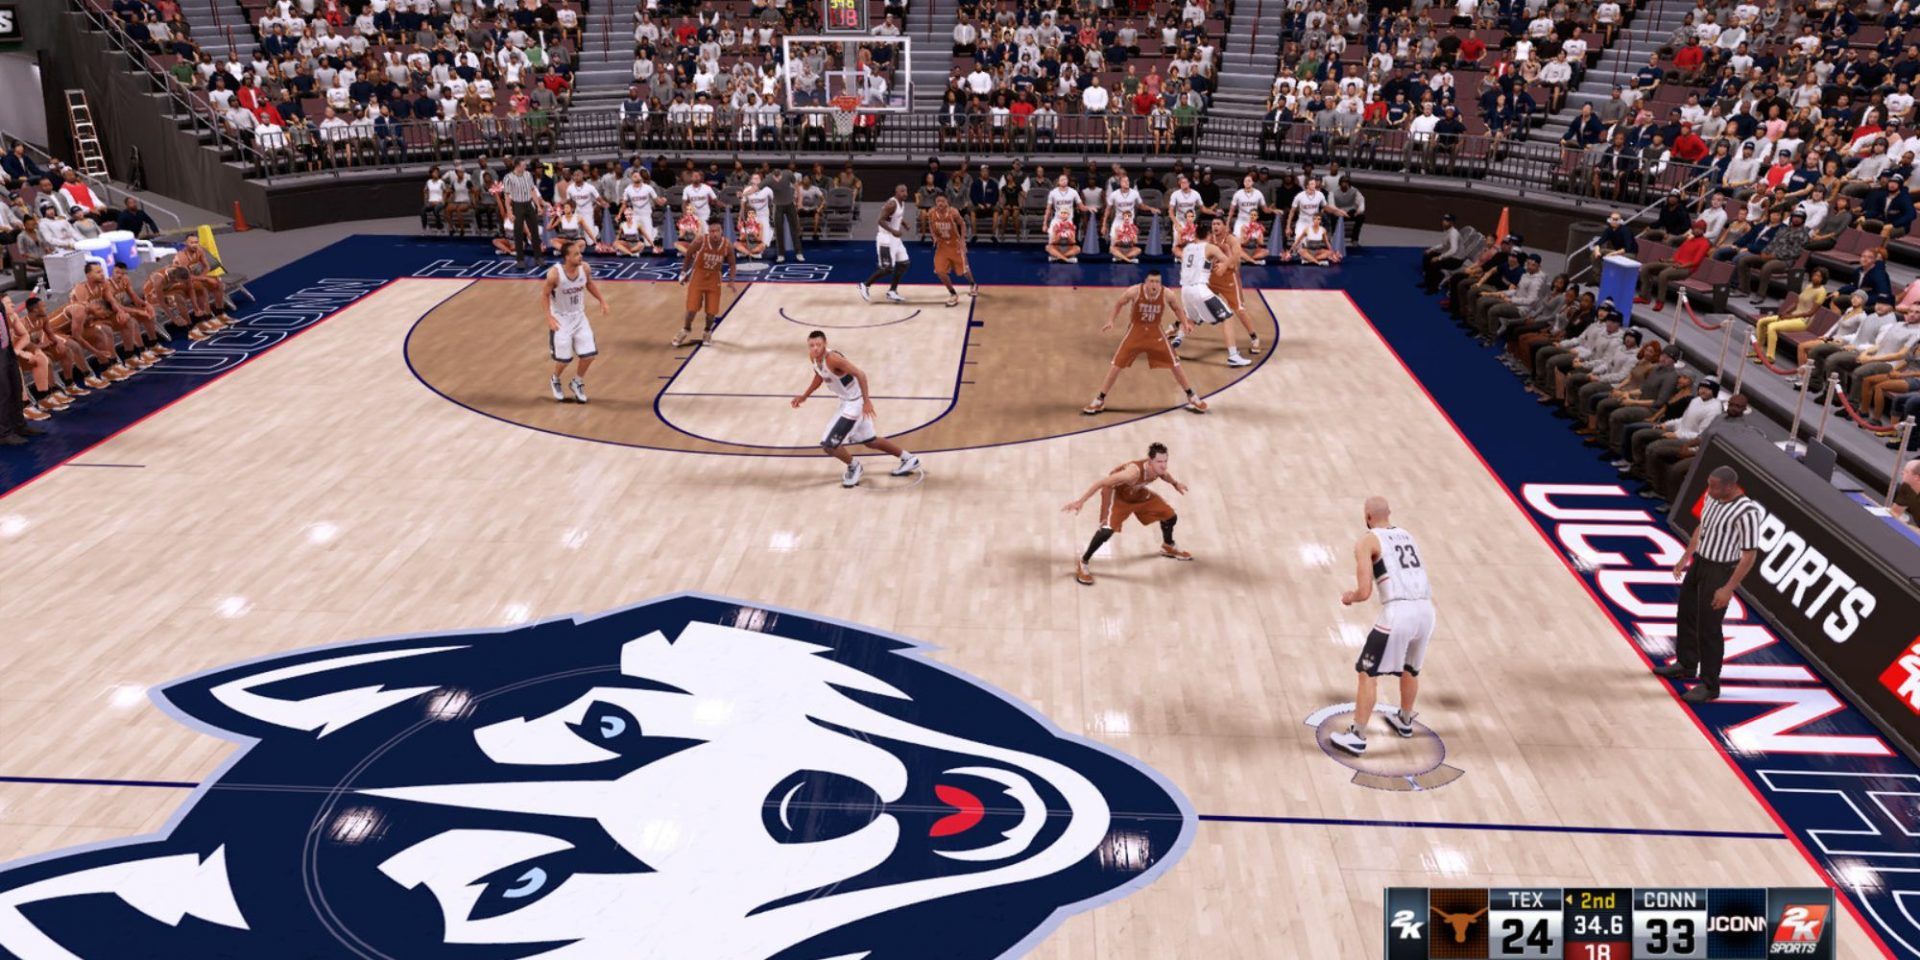 Uconn taking on Texas at home in NBA 2K